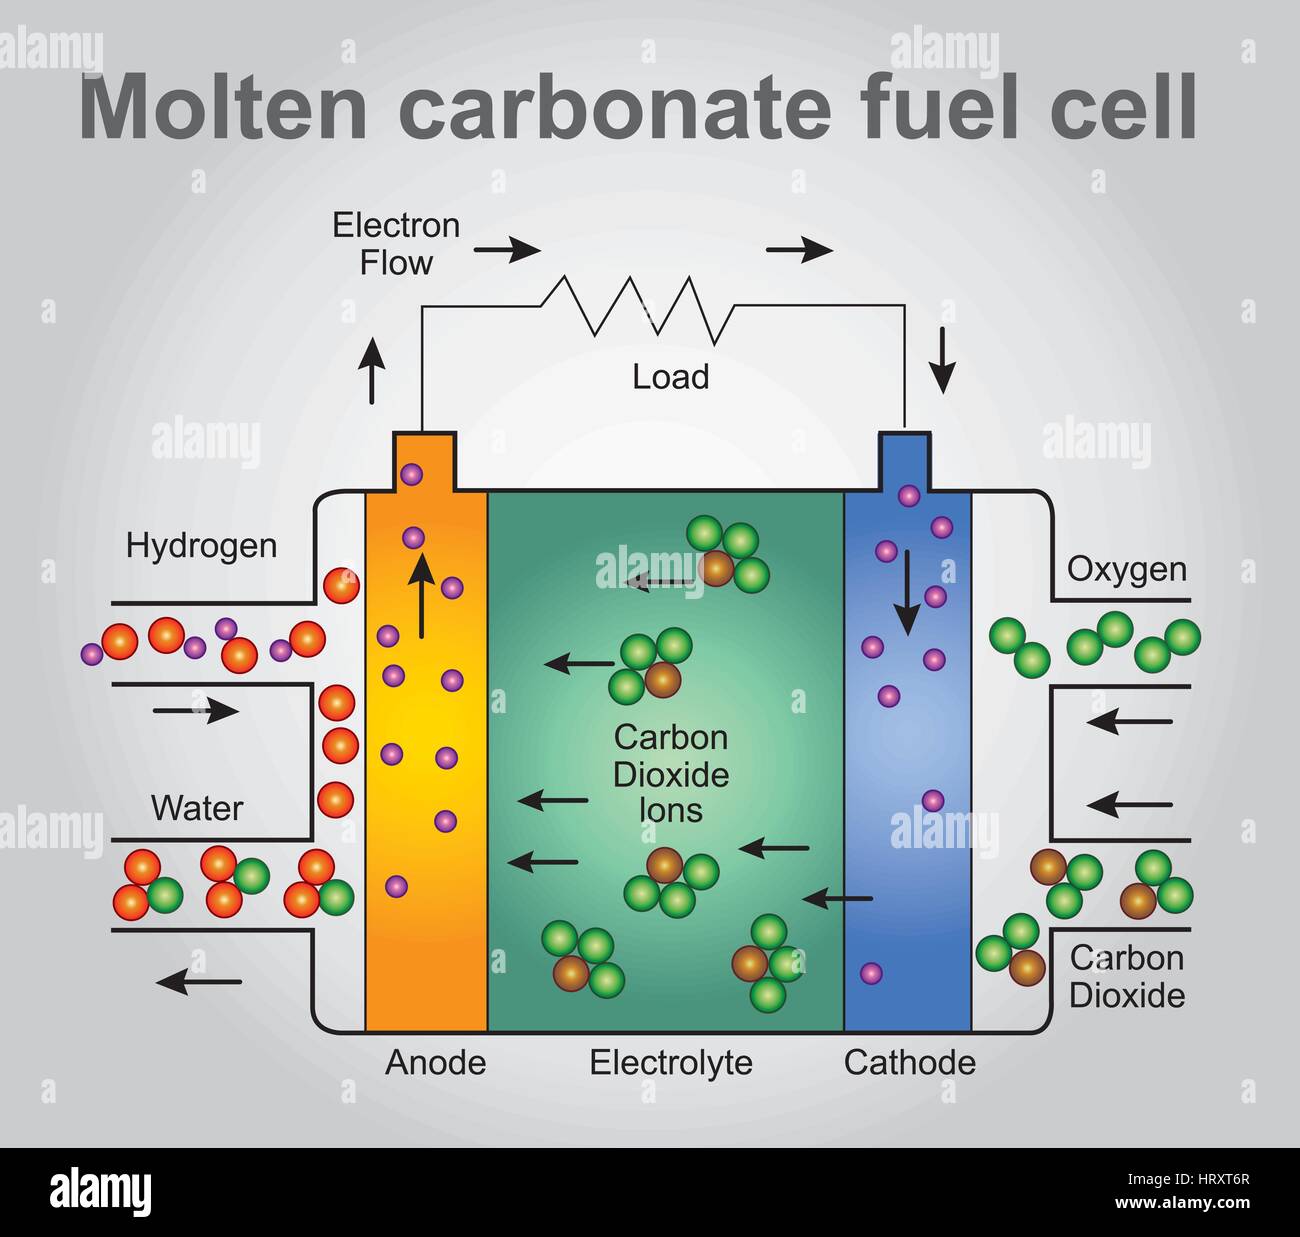 Molten carbonate fuel cells are currently being developed for natural gas, biogas (produced as a result of anaerobic digestion or biomass gasification Stock Vector